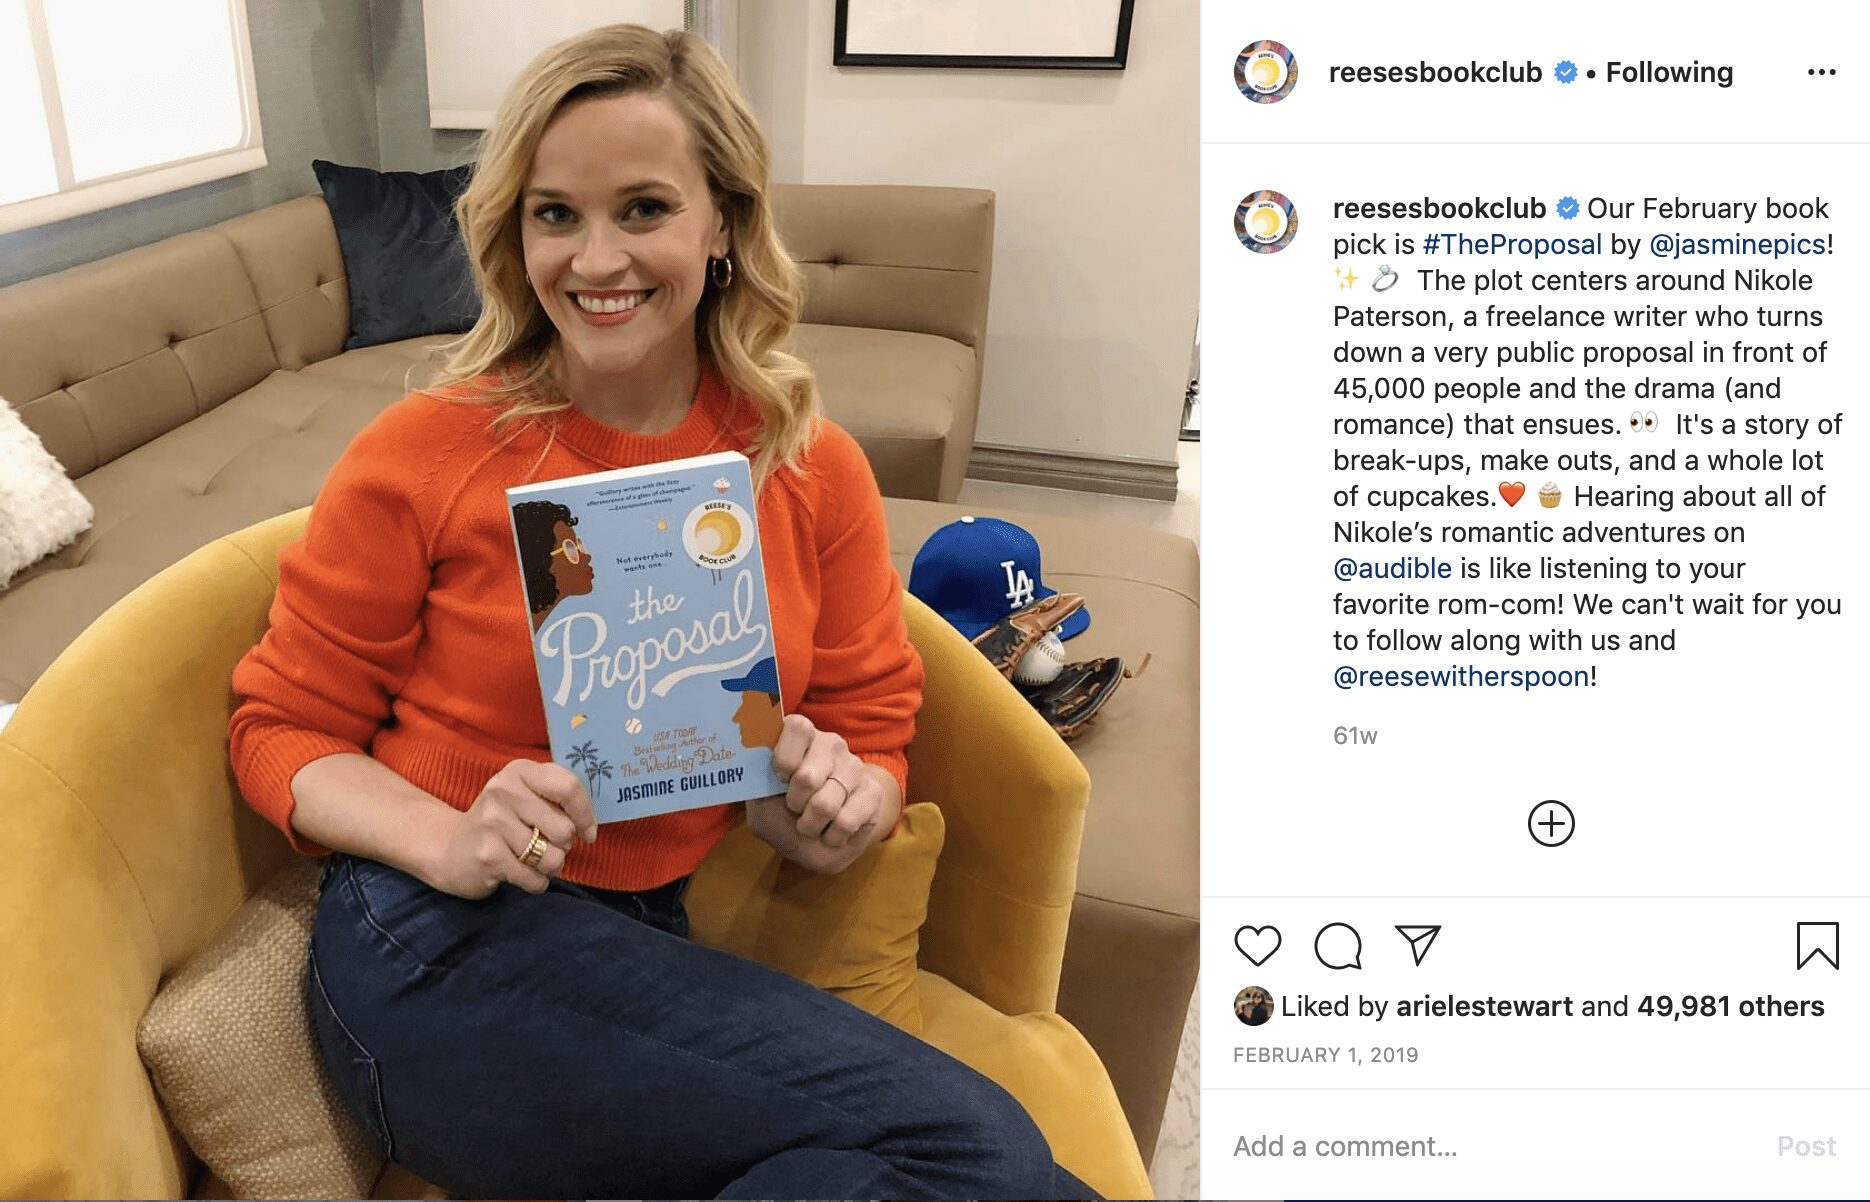 The Proposal: Reese's Book Club